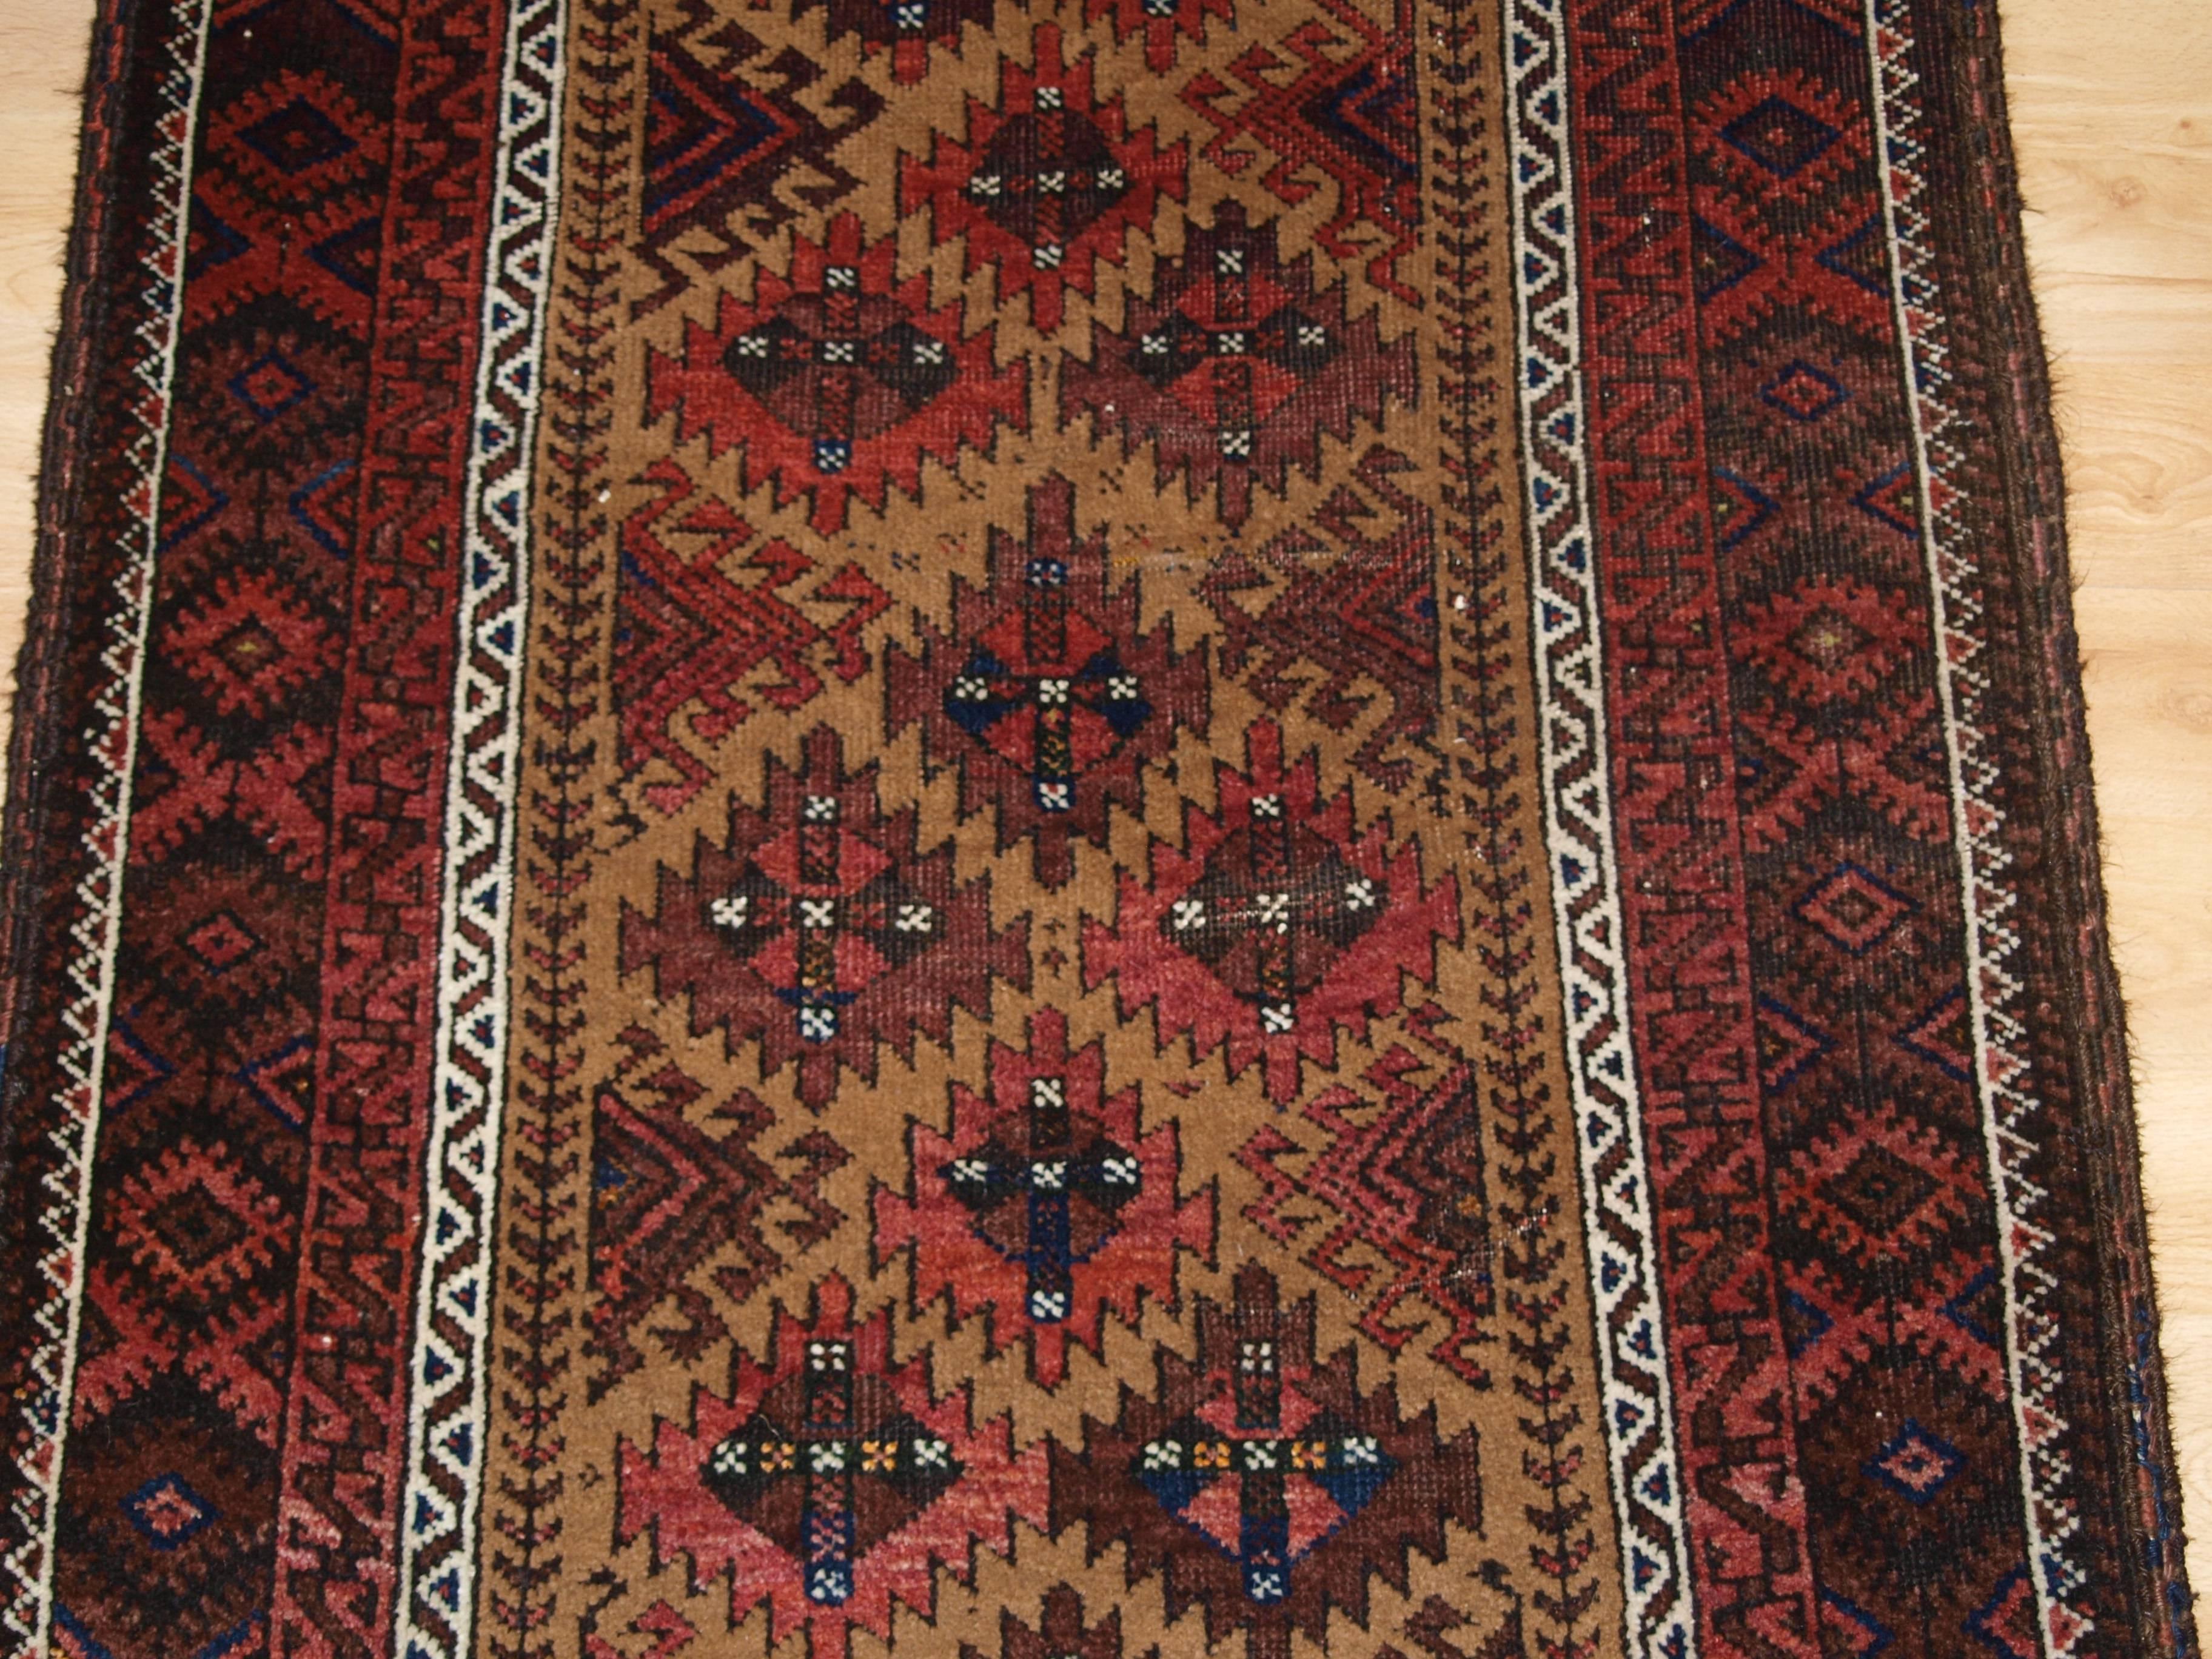 Antique Baluch Camel Ground Prayer Rug, circa 1900 In Excellent Condition For Sale In Moreton-in-Marsh, GB